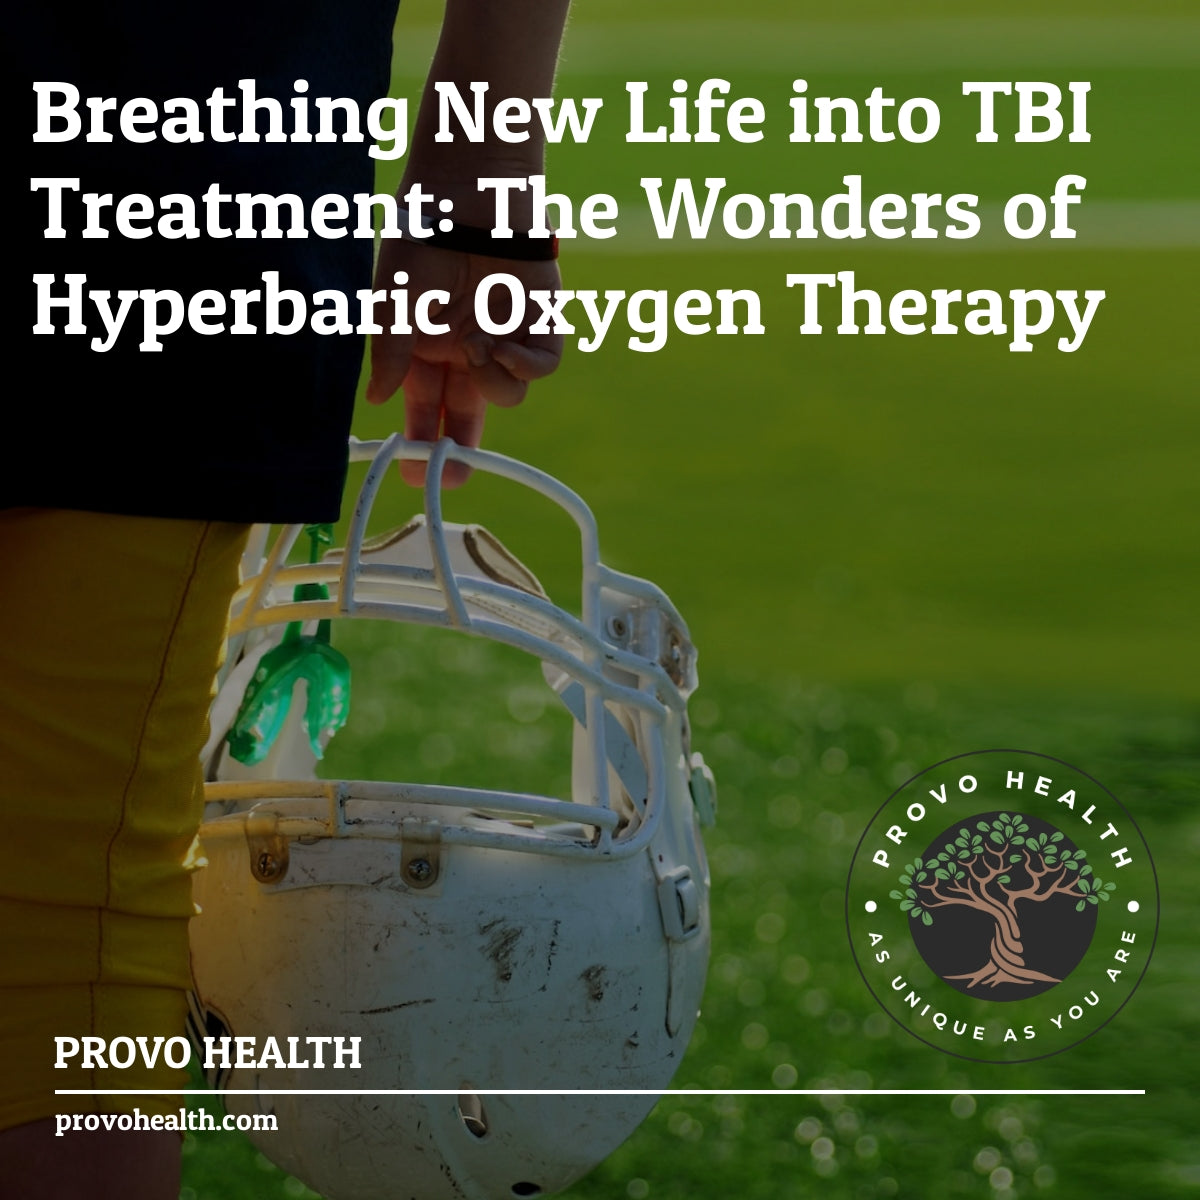 Breathing New Life into TBI Treatment: The Wonders of Hyperbaric Oxygen Therapy